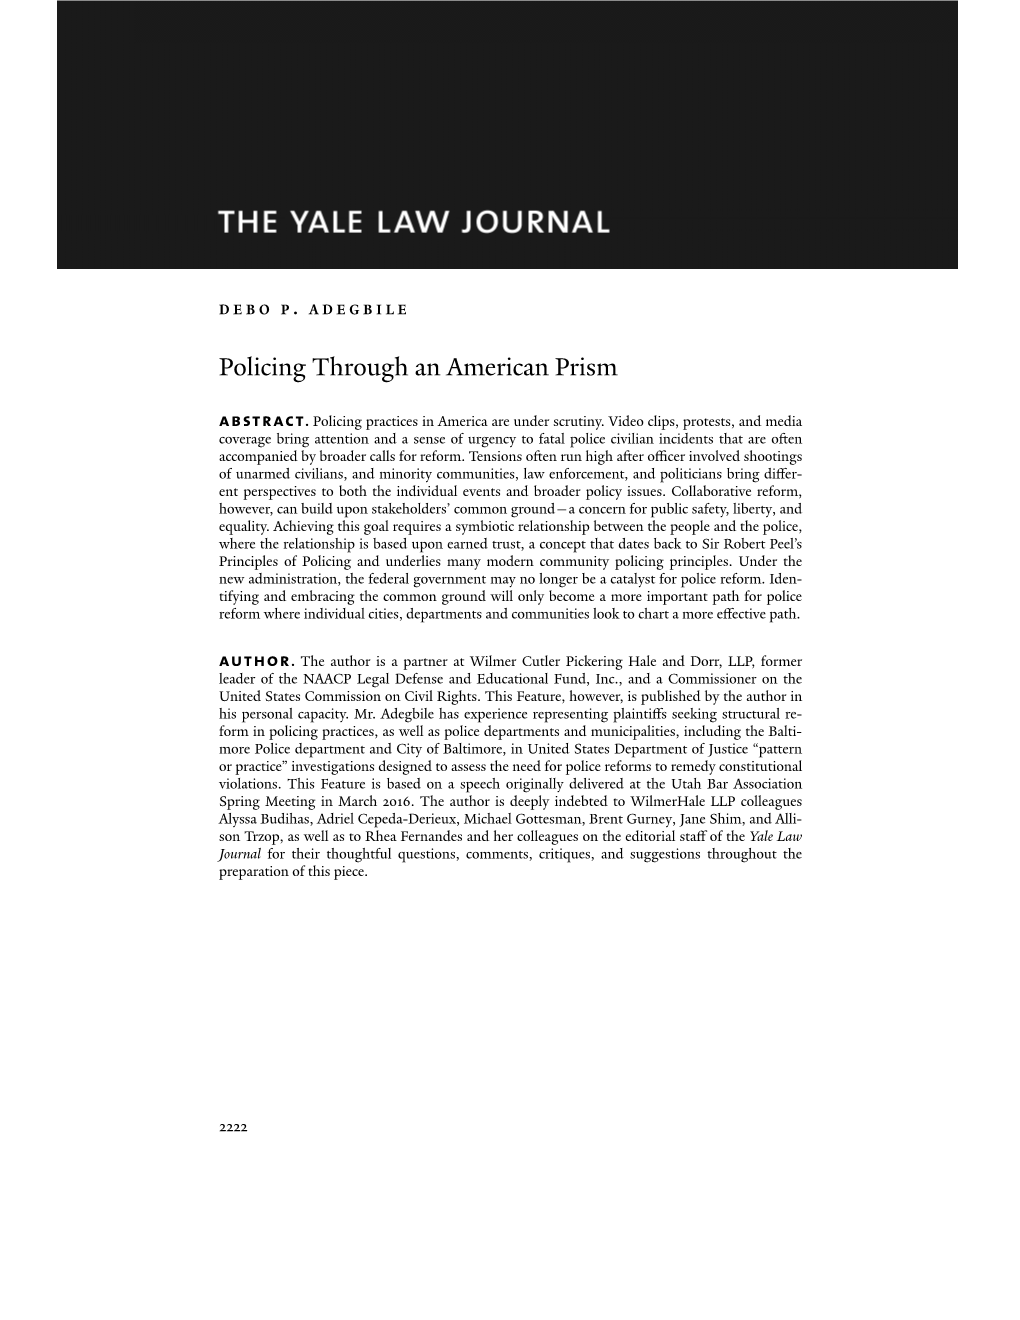 Policing Through an American Prism Abstract